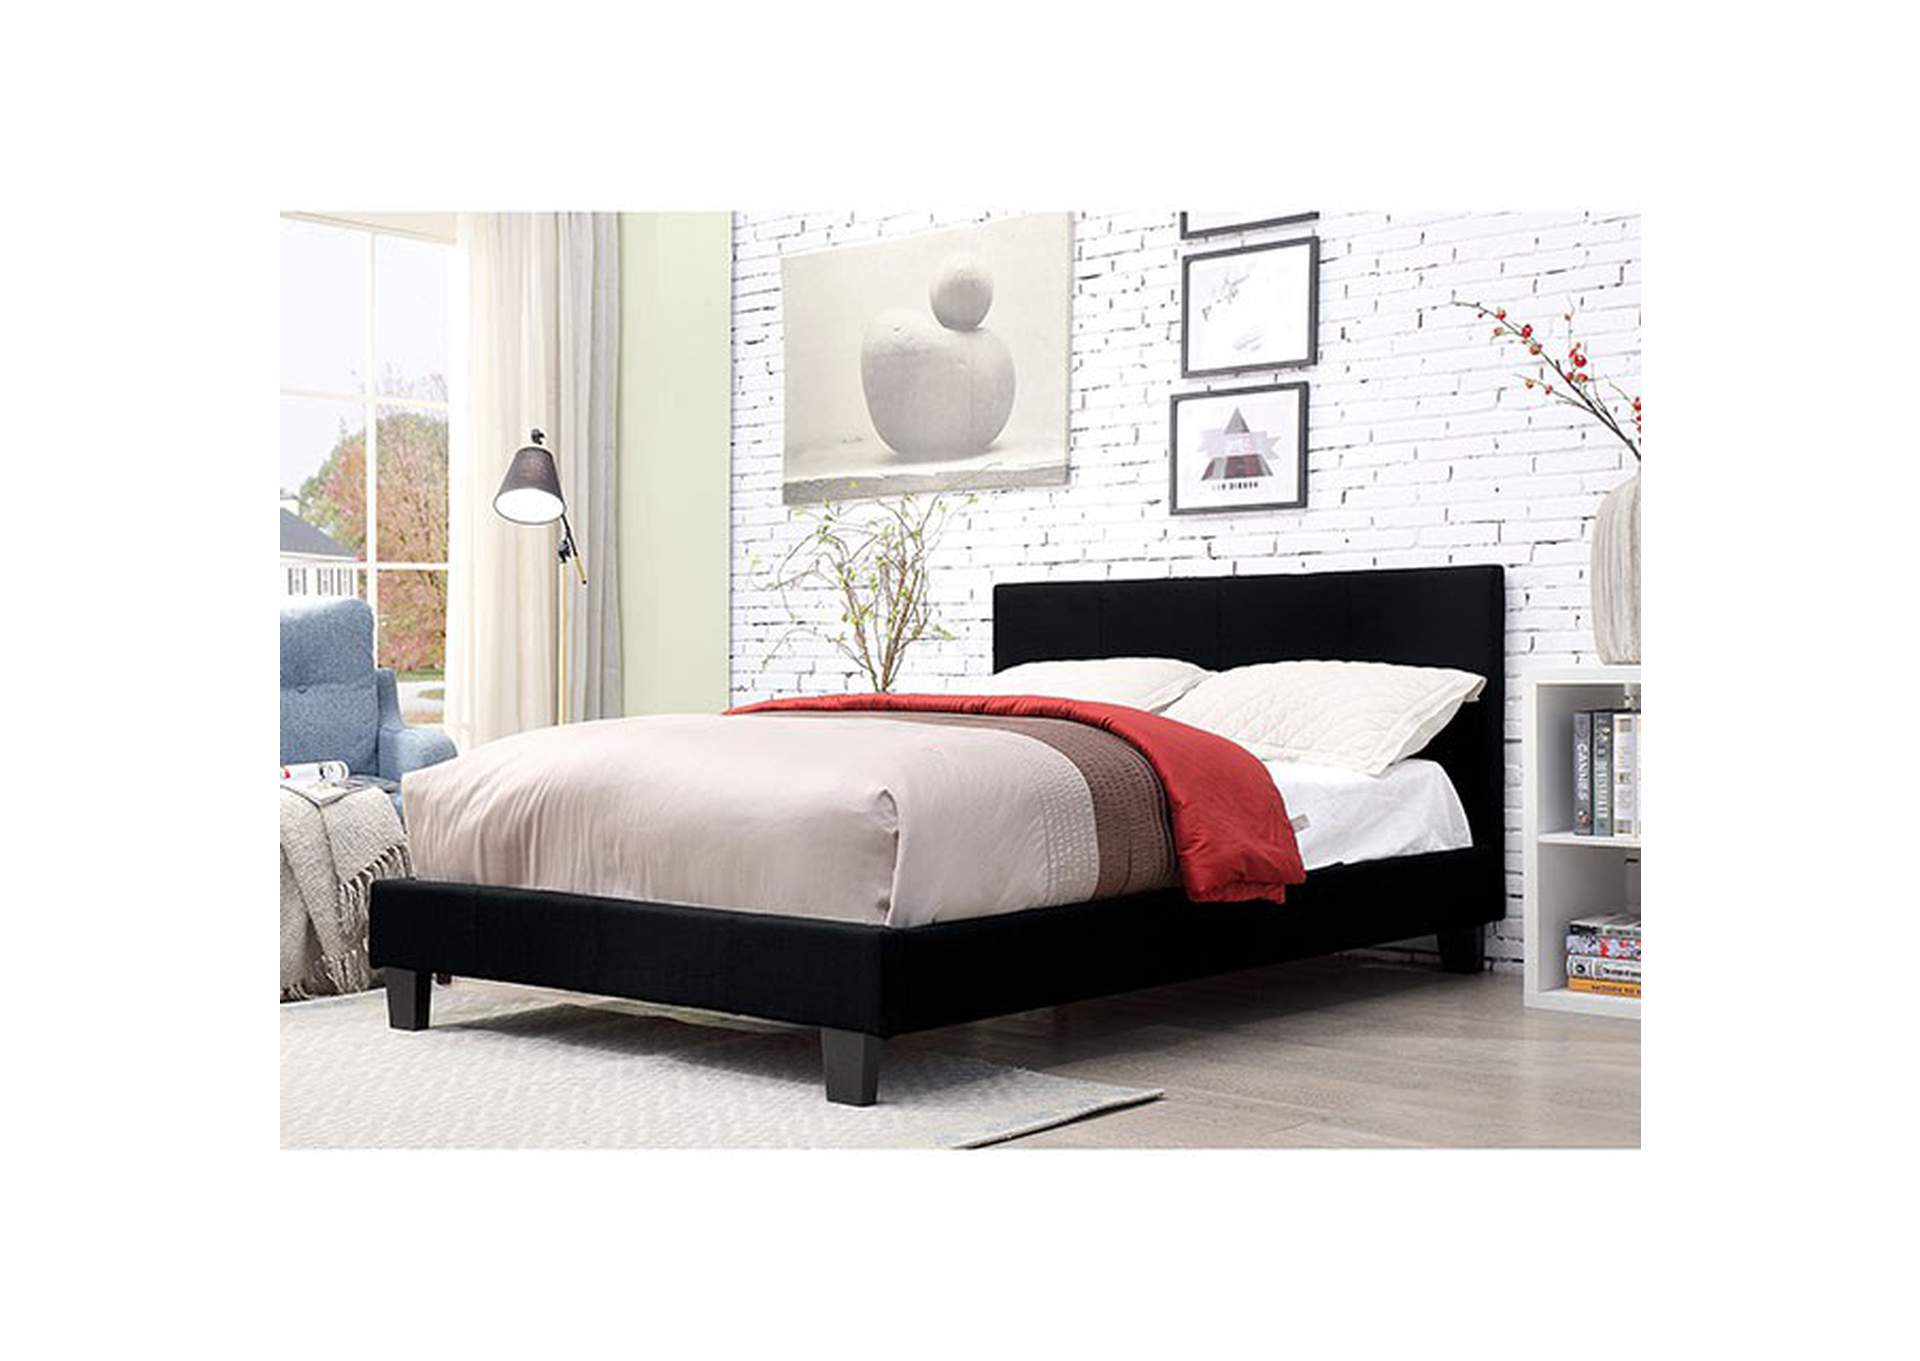 Sims Twin Bed,Furniture of America